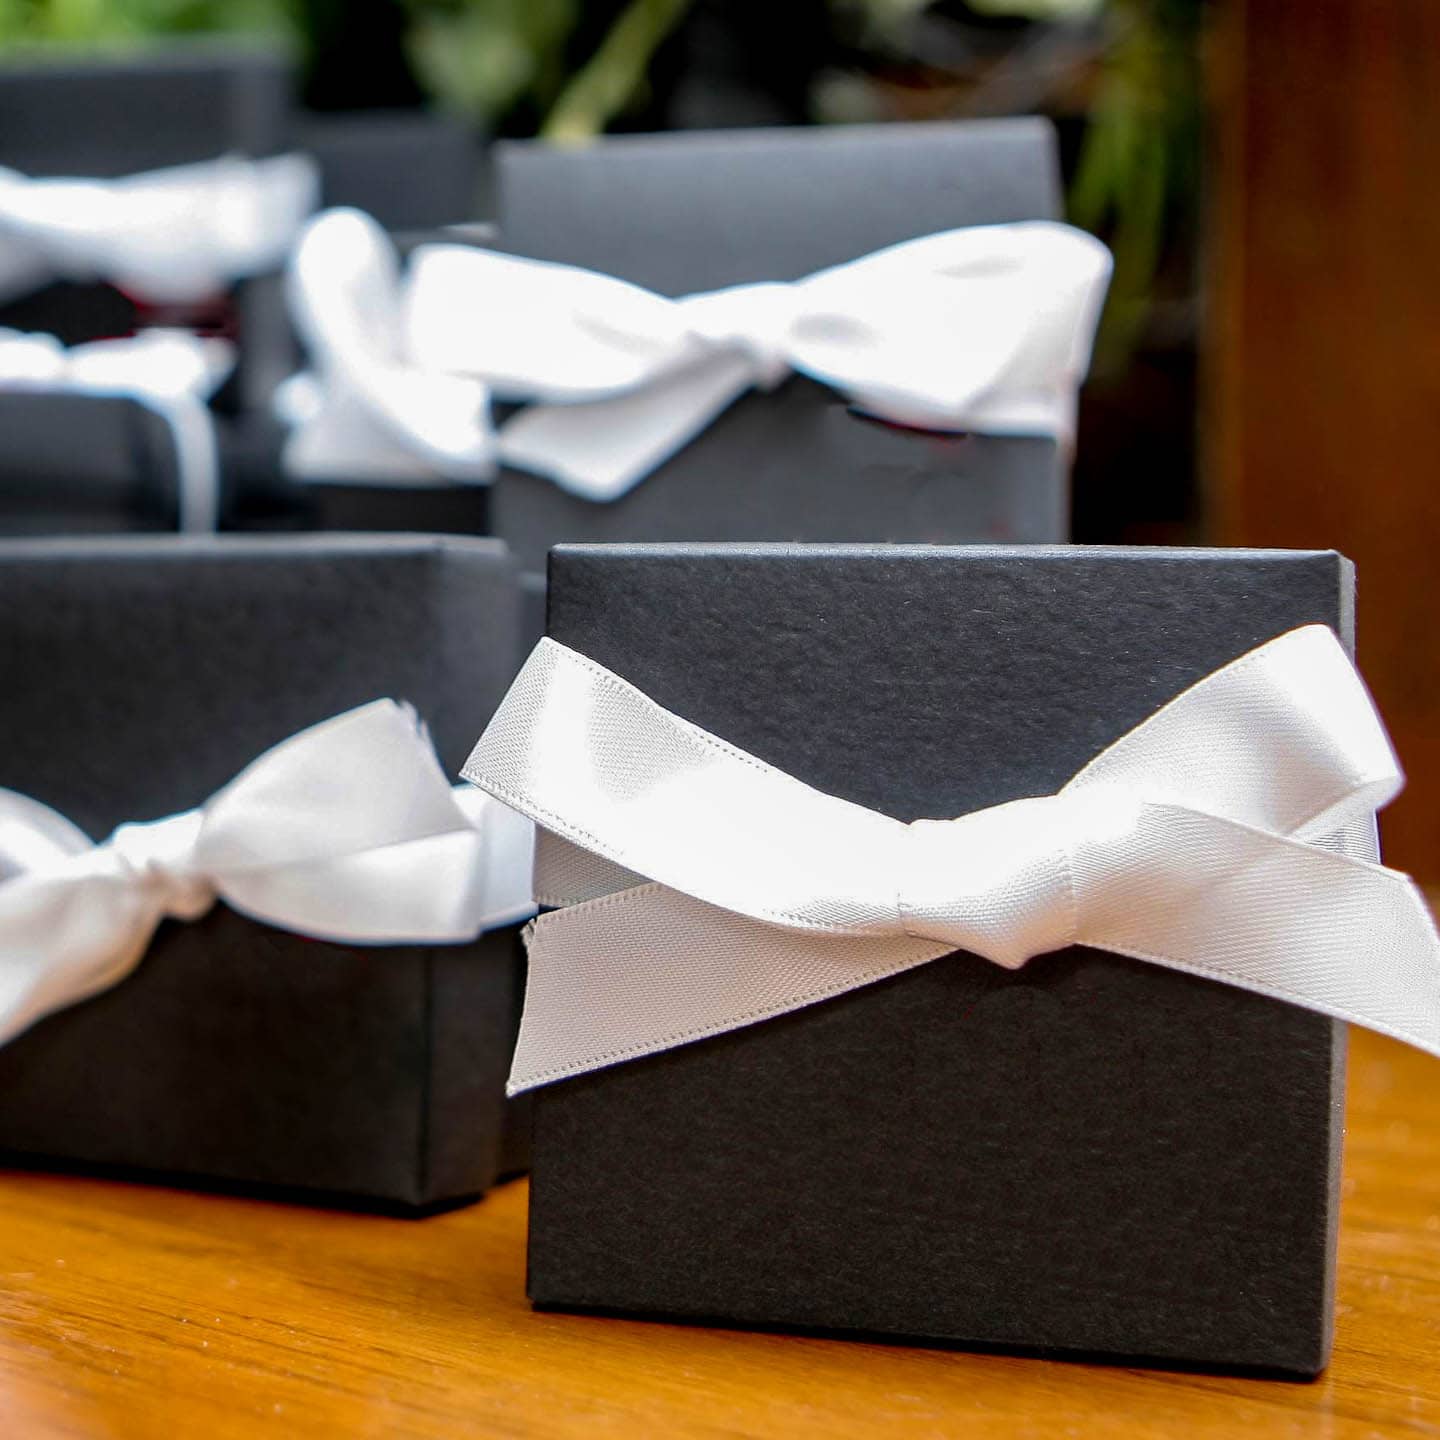 black party favor boxes with white ribbons on them